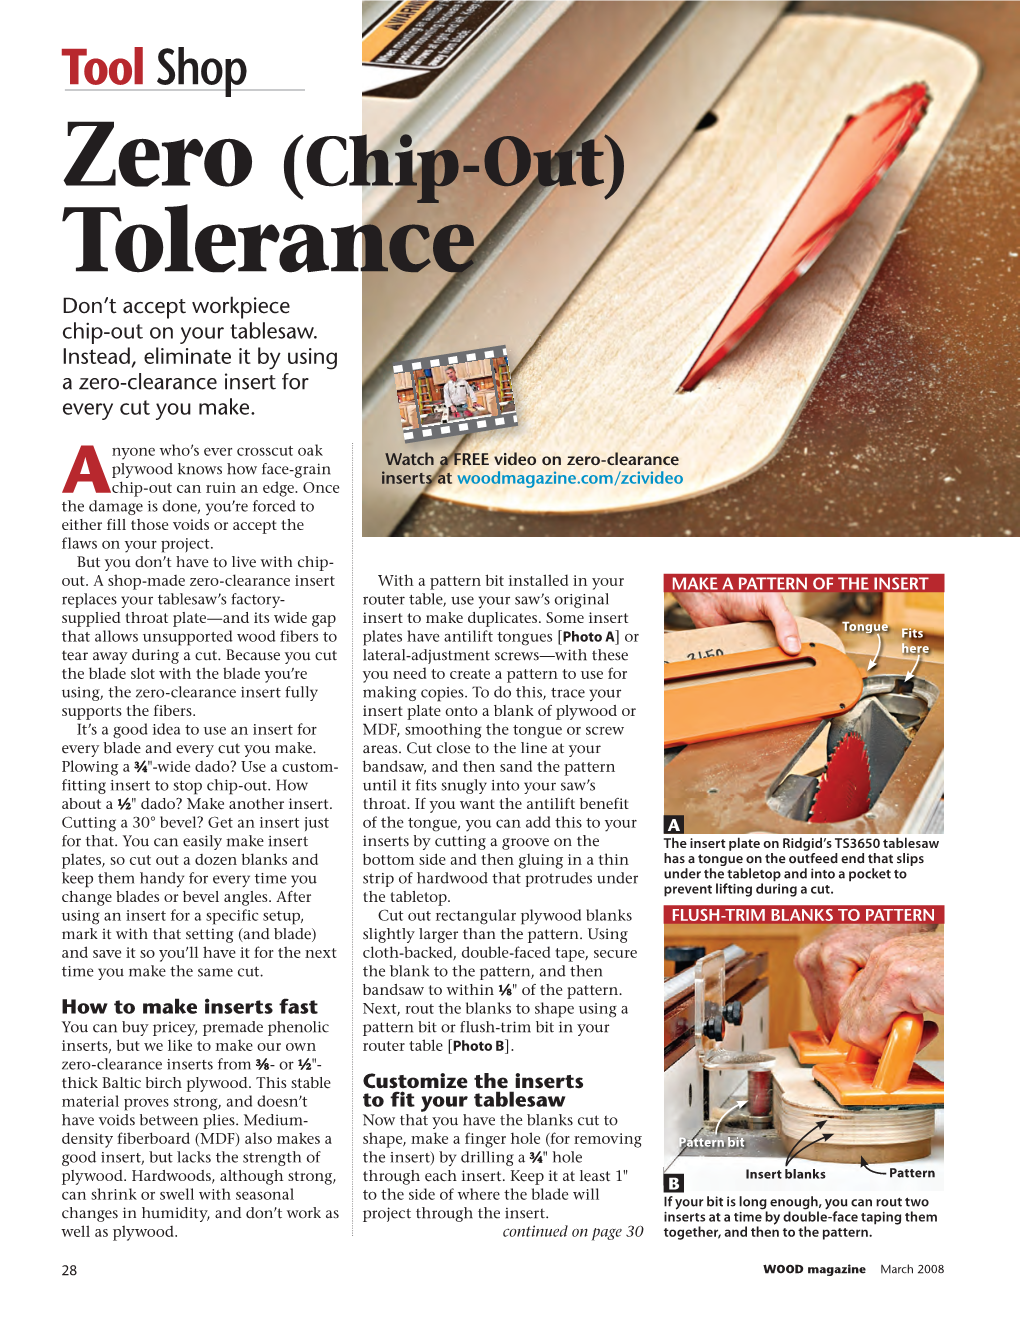 Tolerance Don’T Accept Workpiece Chip-Out on Your Tablesaw